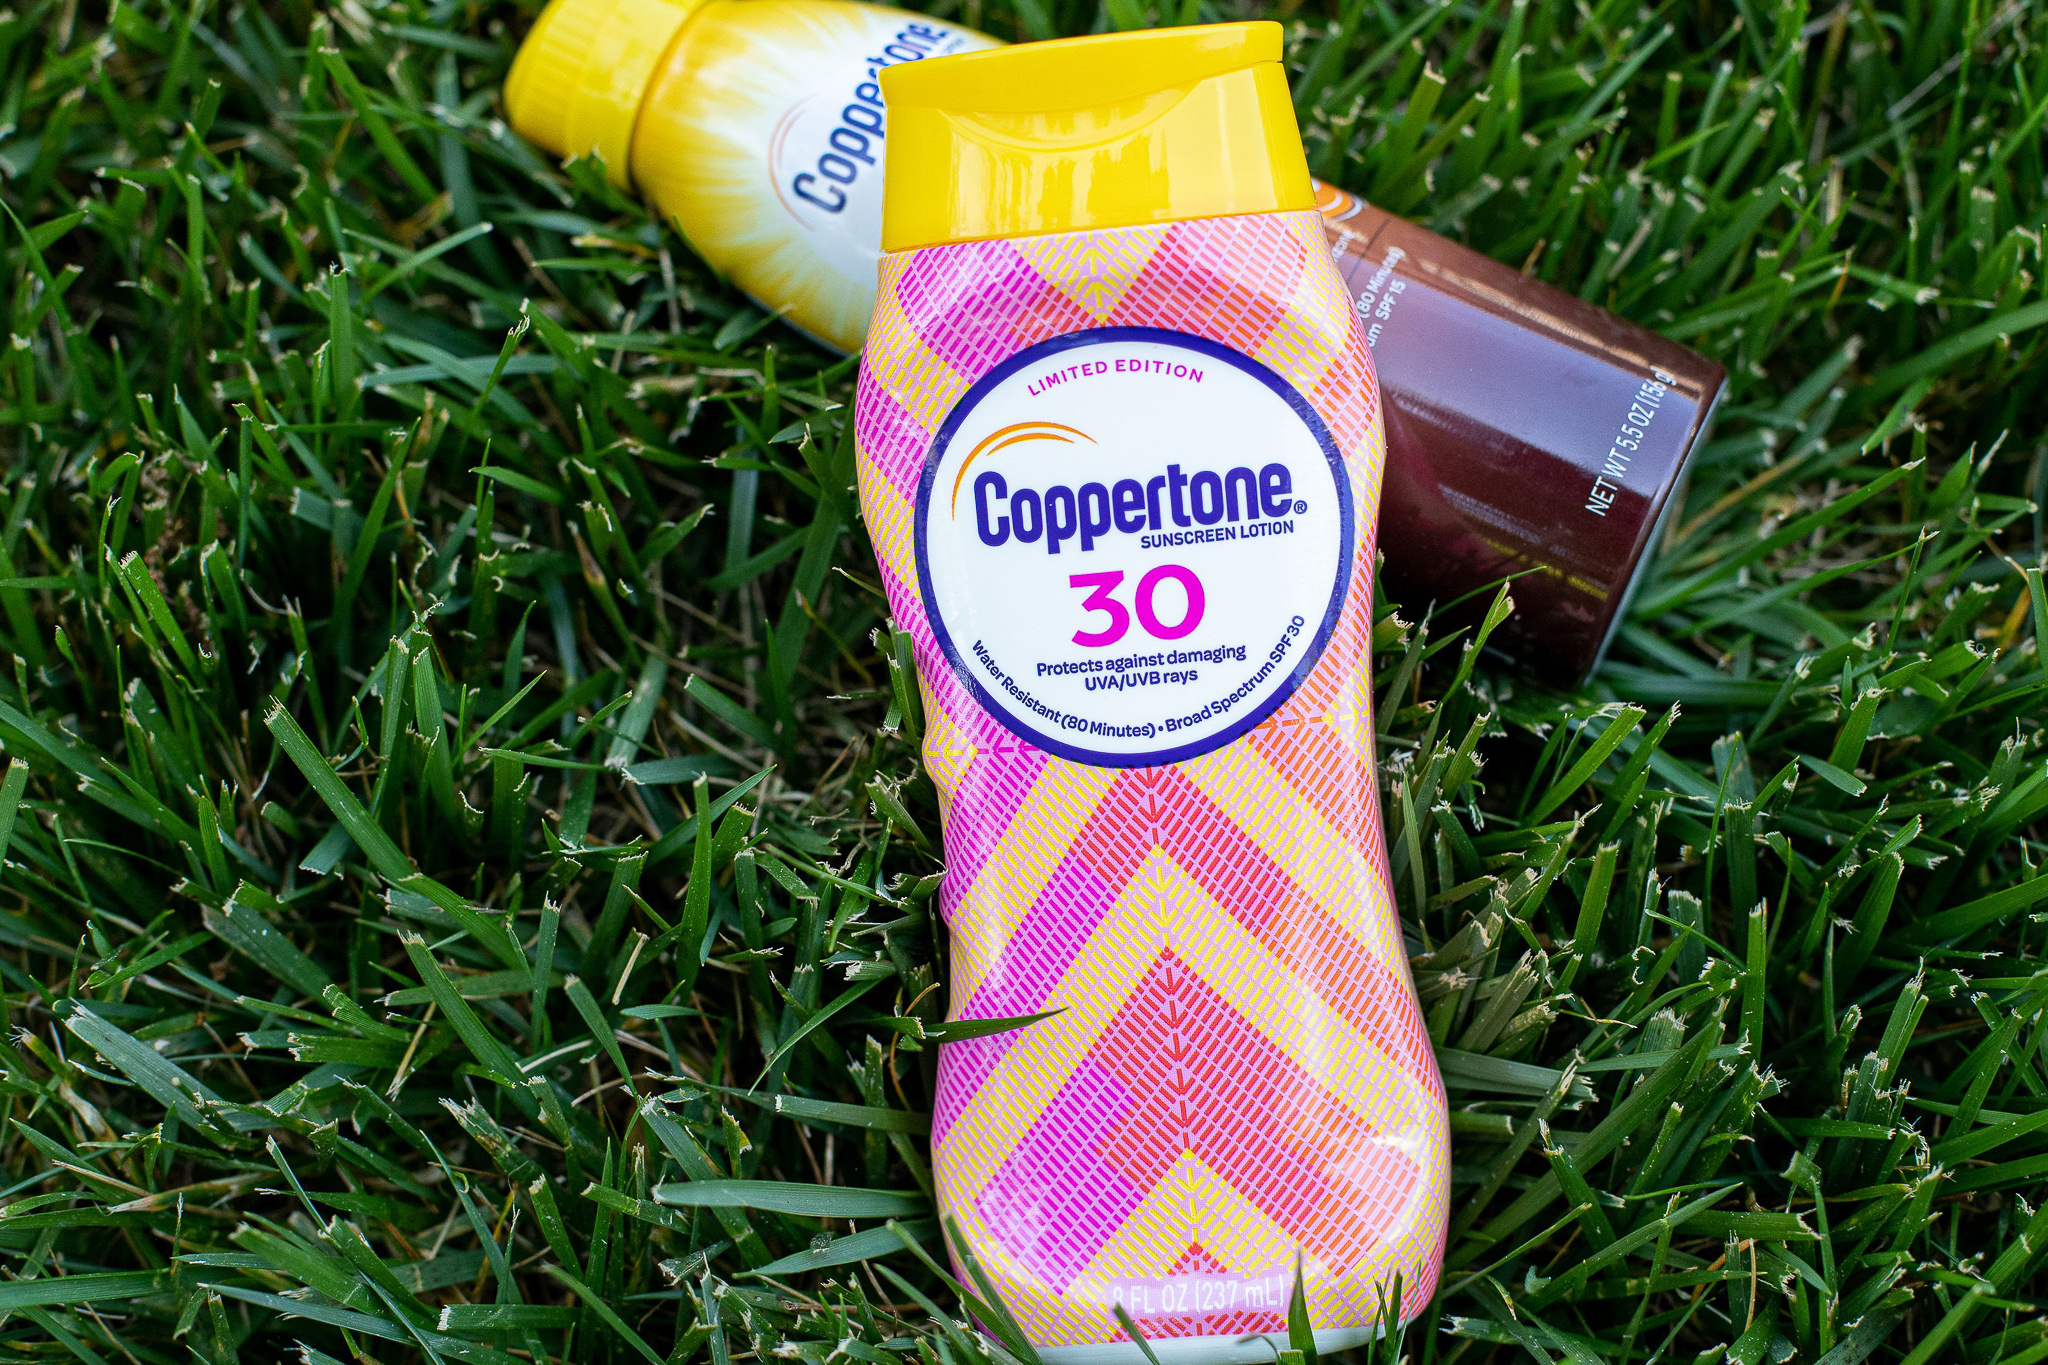 New Coppertone Suncare Products Coupon For The Publix Sale – As Low As $4.49 Per Bottle